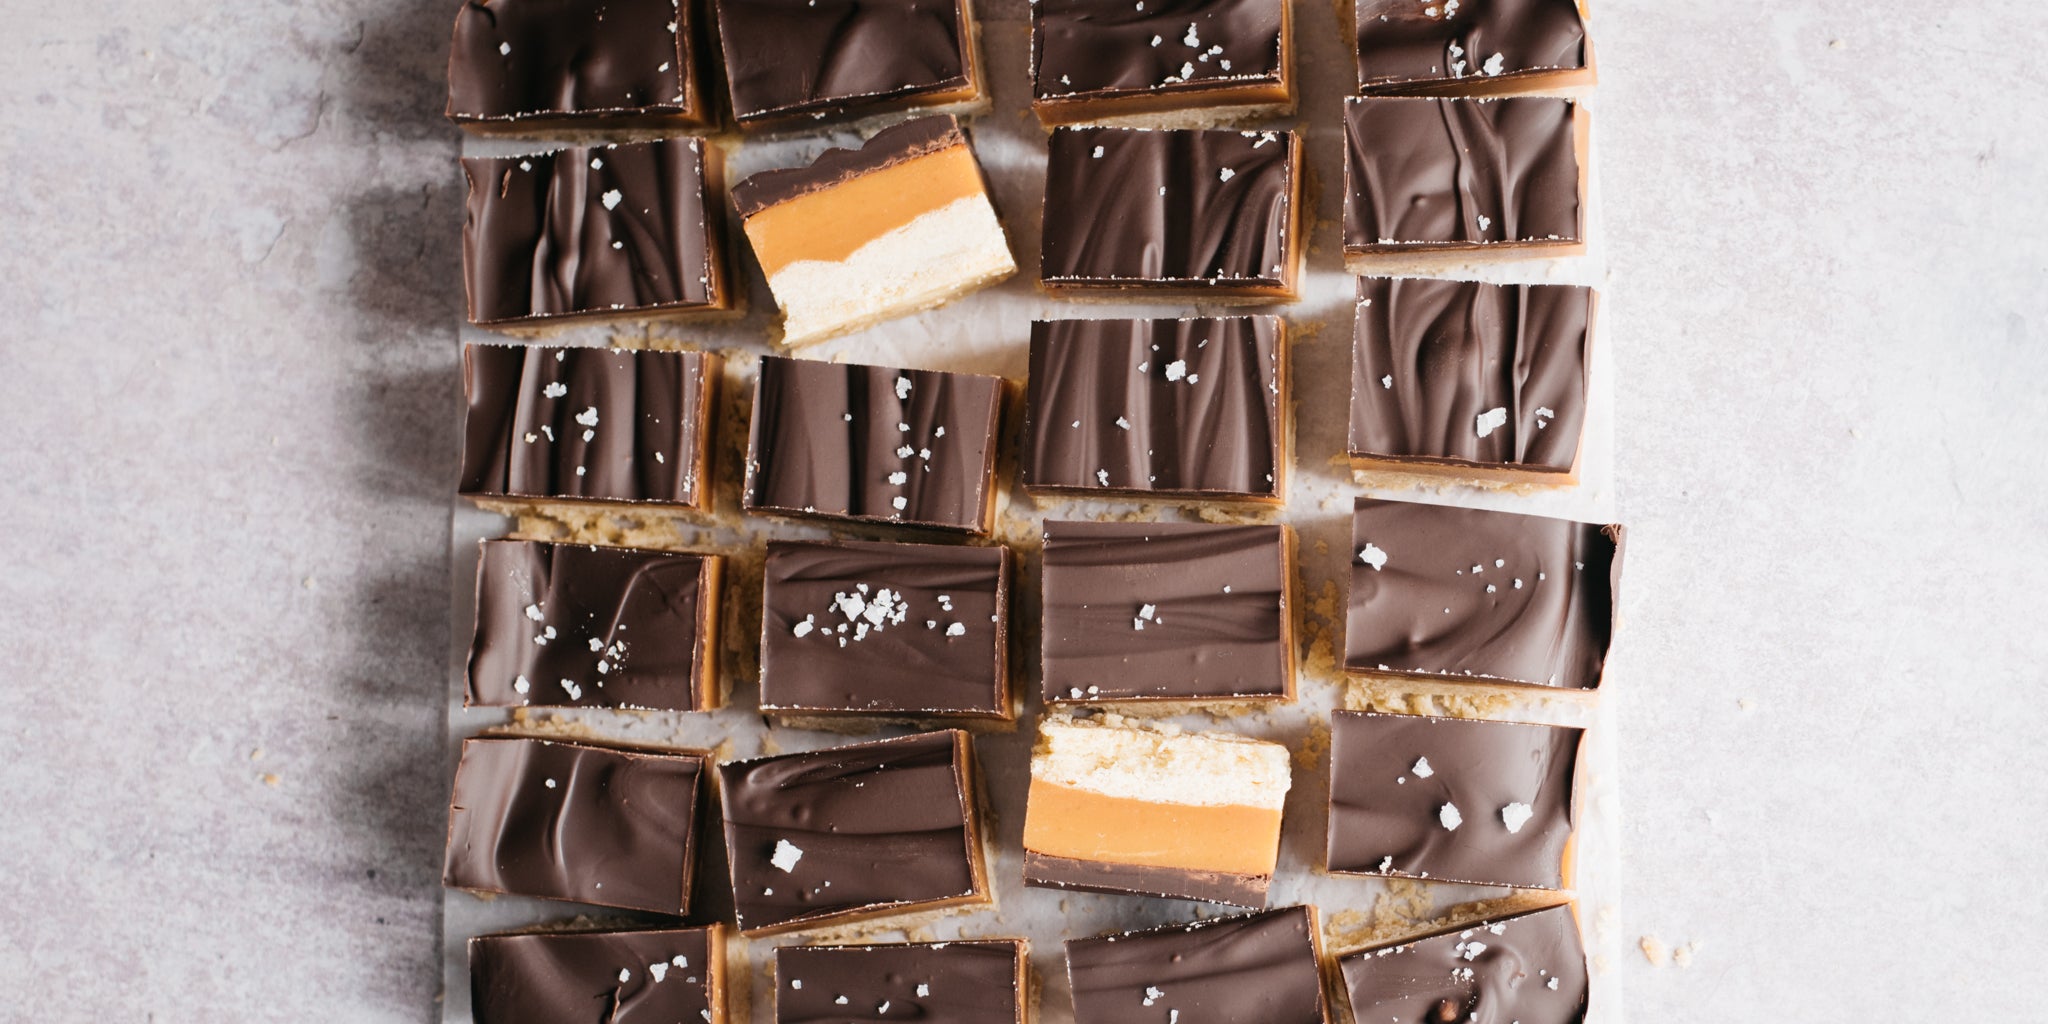 Squares of millionaires shortbread lined up 